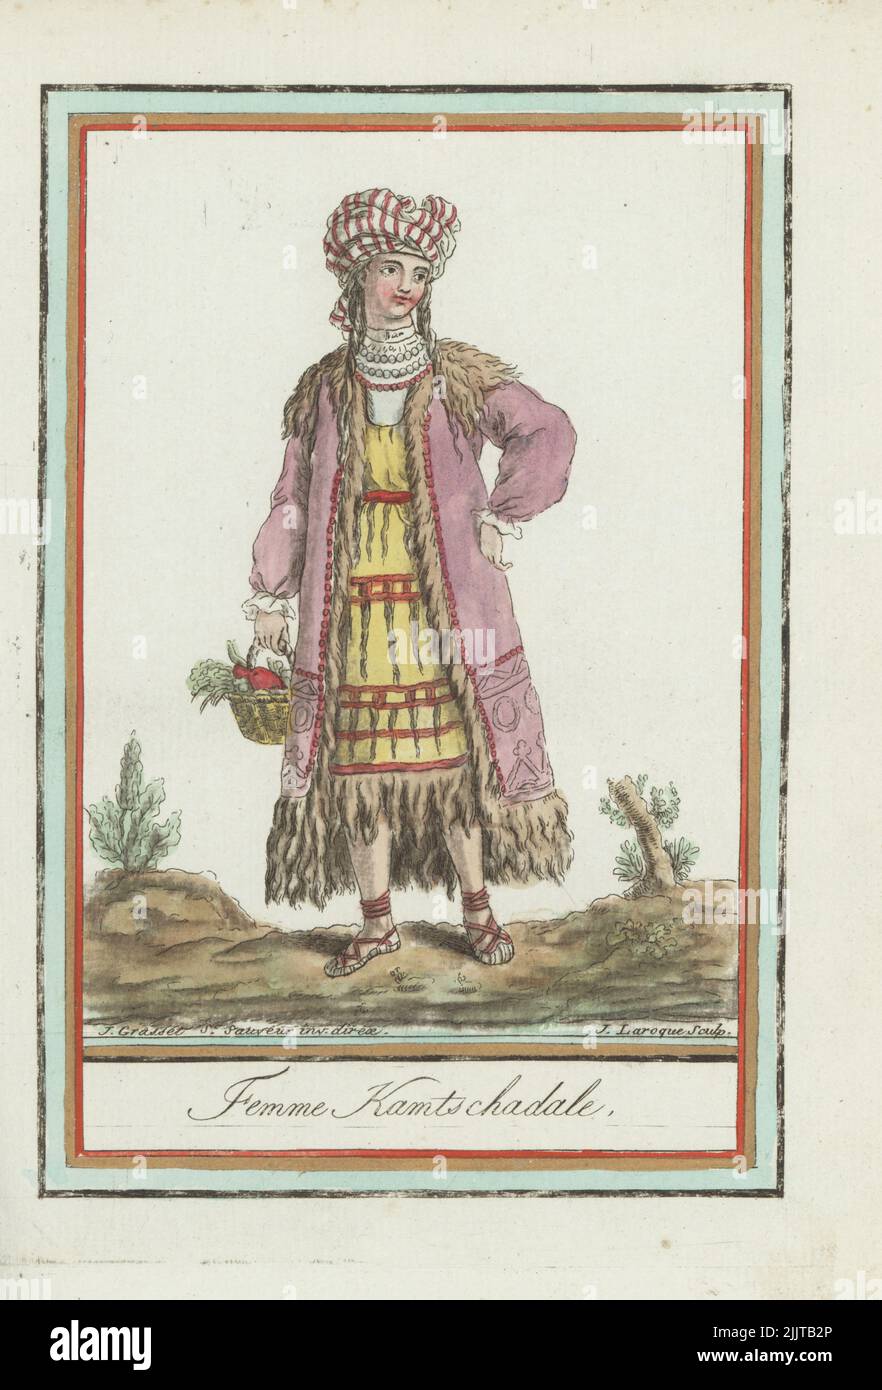 Itelmen or Kamchadal woman. In striped turban, high collar shirt, fur-lined coat, animal-skin gown dressed with fringes, sandals, holding a basket of vegetables. Aboriginal people of Kamchatka, decimated by Cossacks and smallpox in the 18th century. Femme Kamtschadale. Handcoloured copperplate engraving by J. Laroque after a design by Jacques Grasset de Saint-Sauveur from his Encyclopedie des voyages, Encyclopedia of Voyages, Bordeaux, France, 1792. Stock Photo